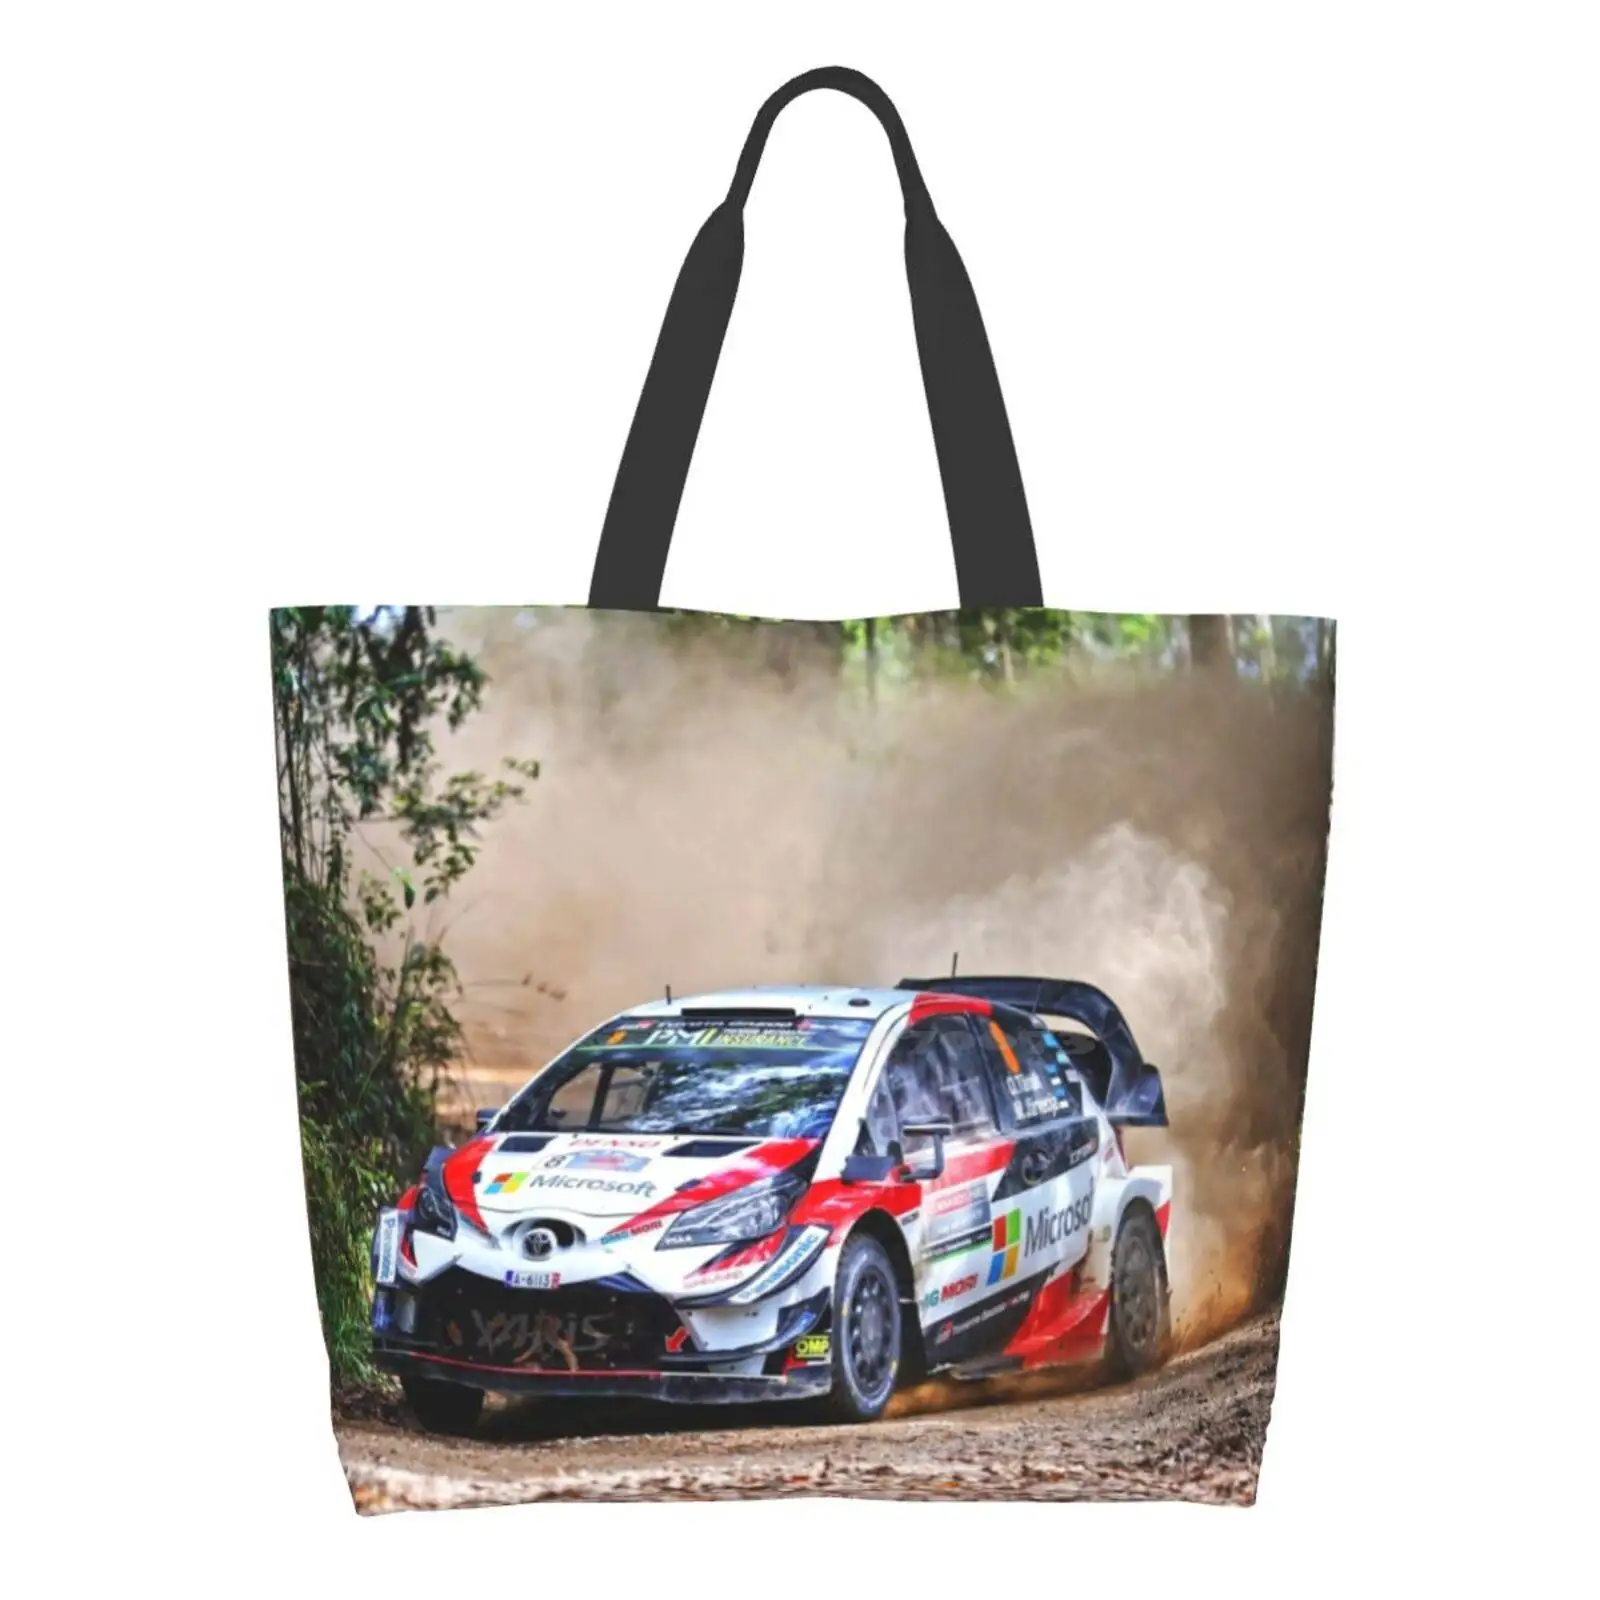 

Toyota Time On Top Large Size Reusable Foldable Shopping Bag Rally Motor Motorsport Fun Wrc World